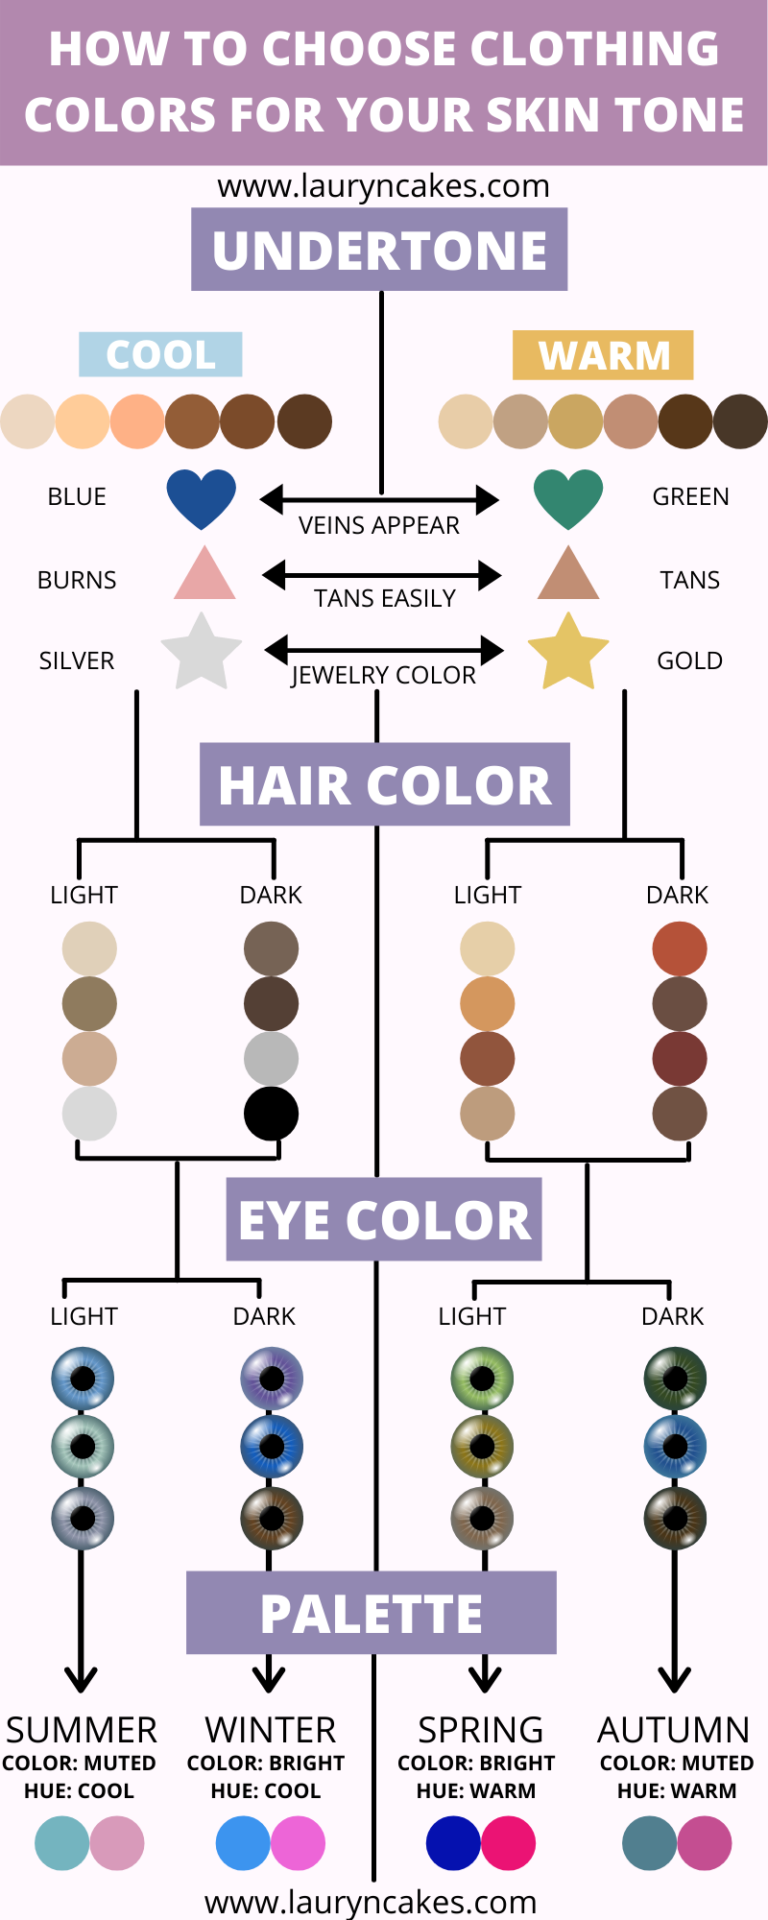 How To Choose Clothing Colors For Your Skin Tone 1 768x1920 